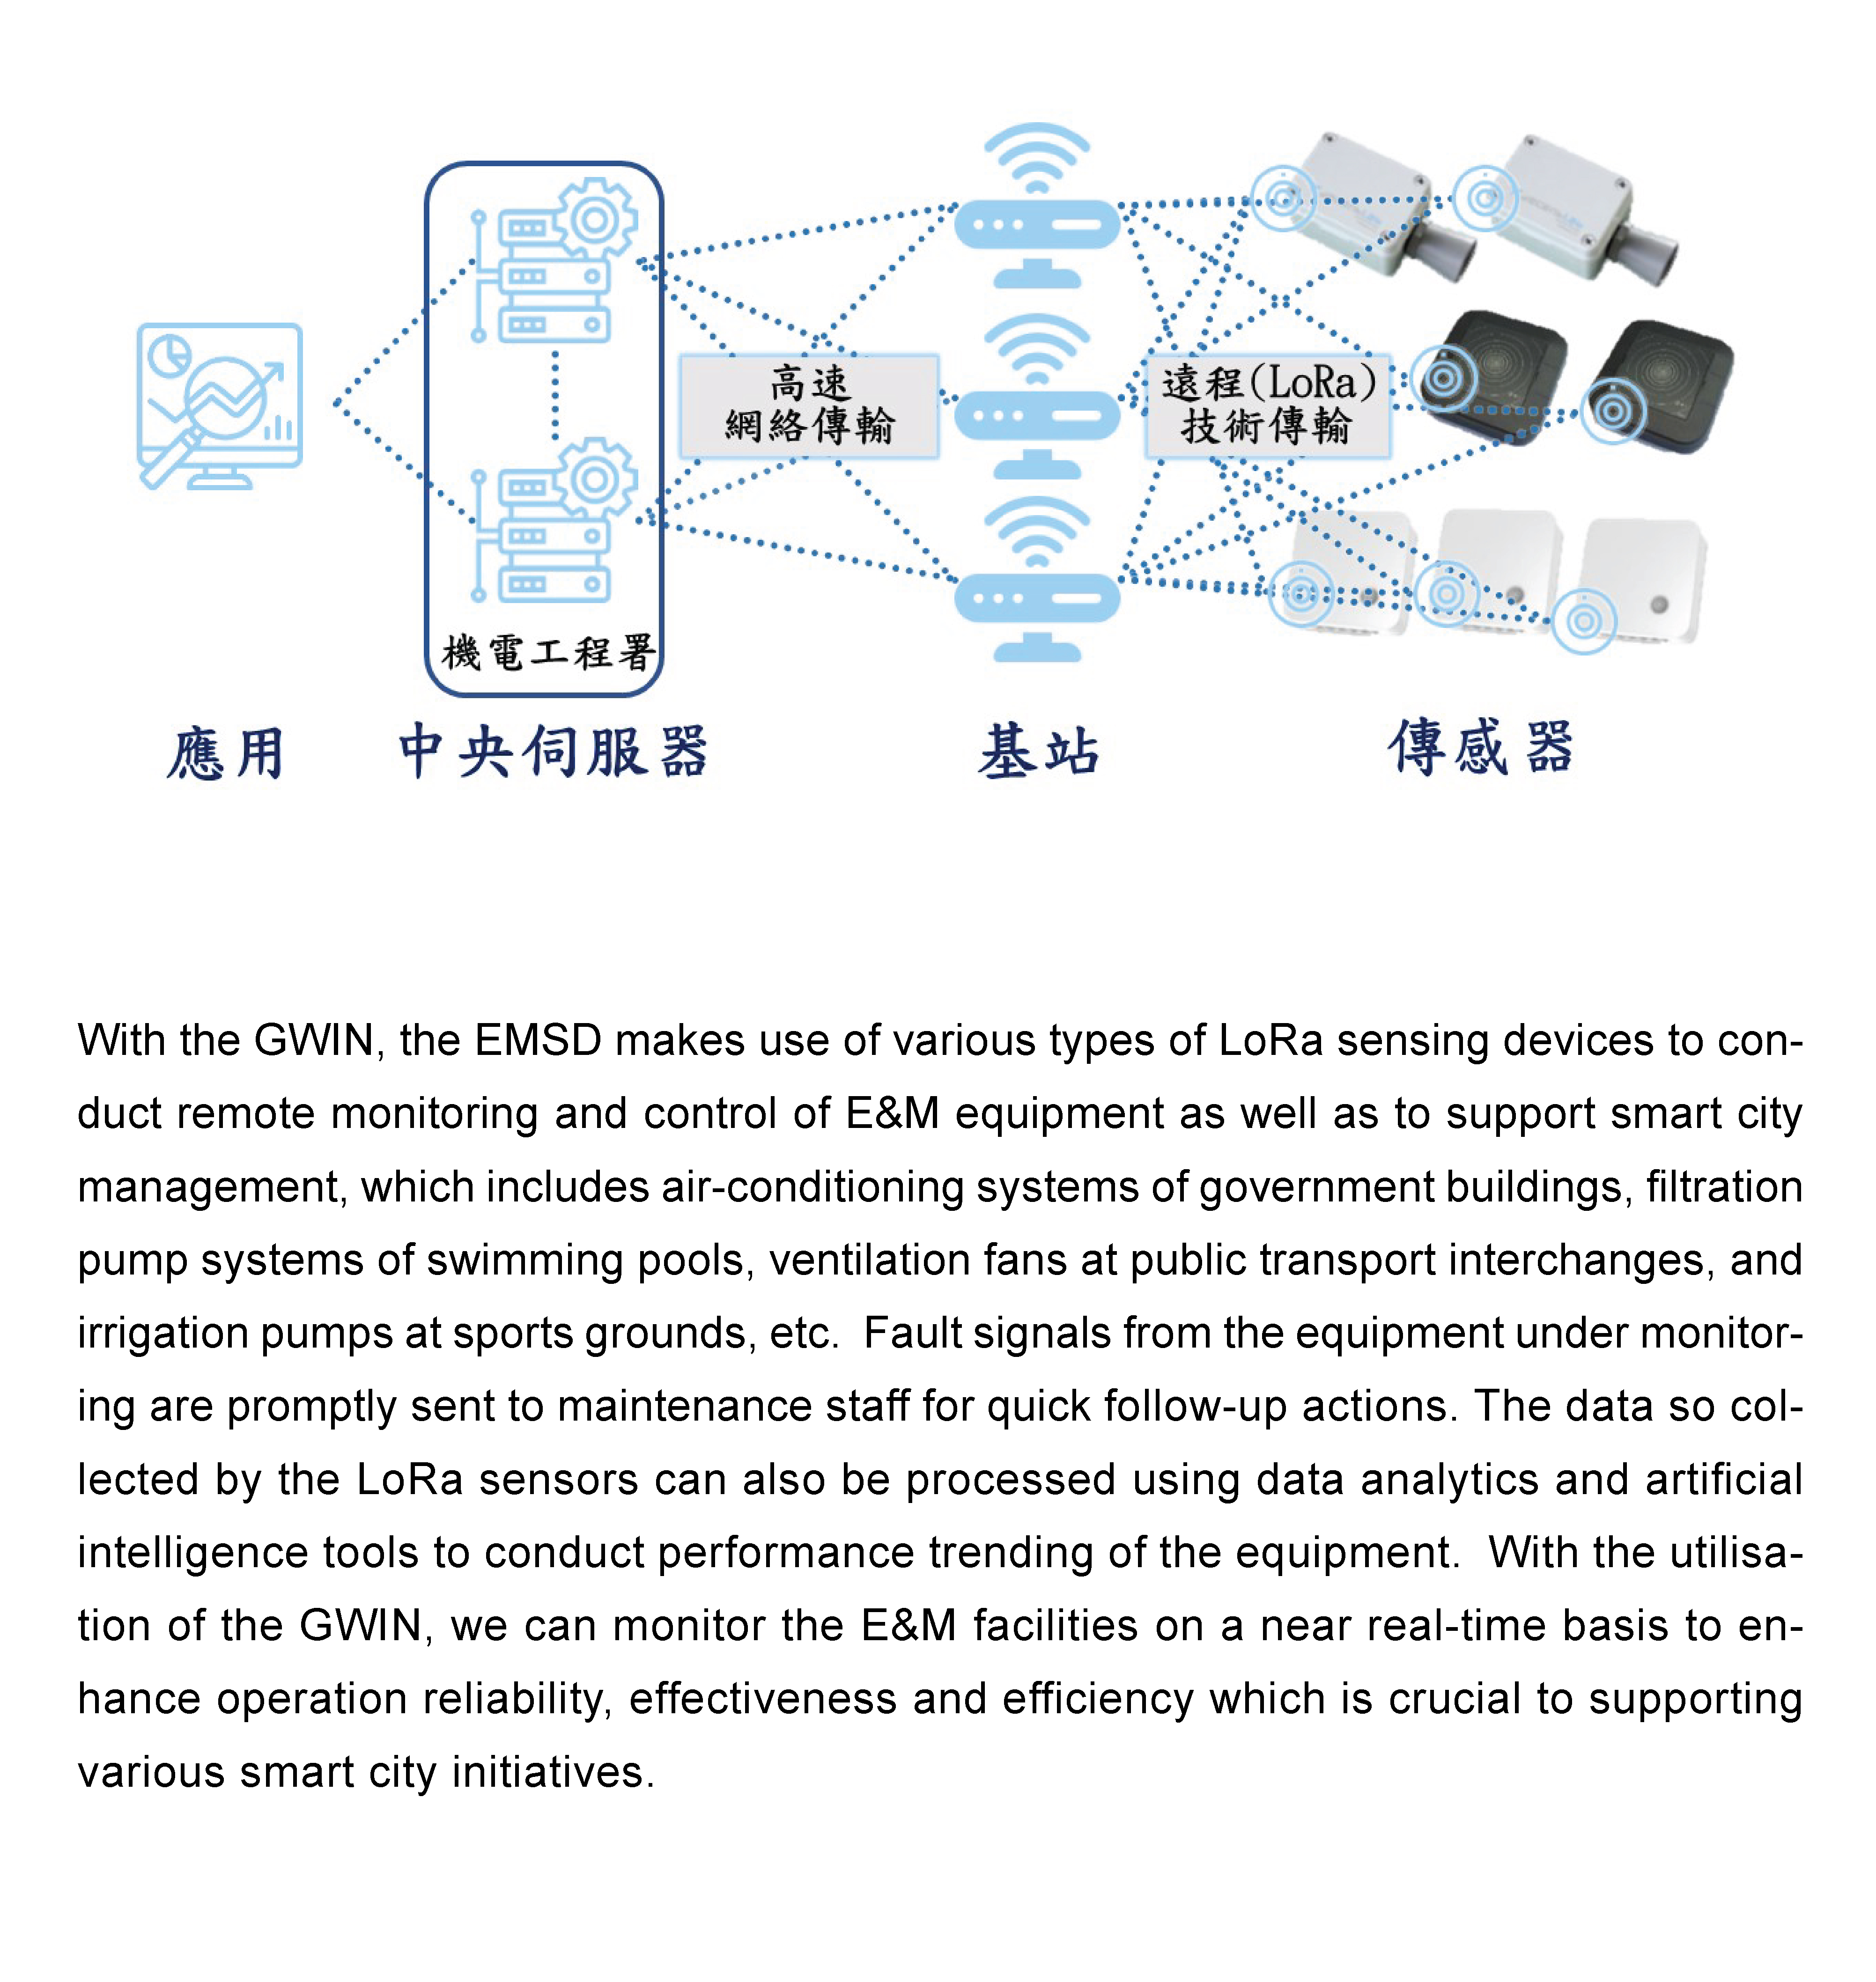 Government-Wide IoT Network (GWIN), With the GWIN, the EMSD makes use of various types of LoRa sensing devices to conduct remote monitoring and control of E&M equipment as well as to support smart city management, which includes air-conditioning systems of government buildings, filtration pump systems of swimming pools, ventilation fans at public transport interchanges and irrigation pumps at sports grounds, etc.  Fault signals from the equipment under monitoring are promptly sent to maintenance staff for quick follow-up actions.  The data so collected by the LoRa sensors can also be processed using data analytics and artificial intelligence tools to conduct performance trending of the equipment.  With the utilisation of the GWIN, we can monitor the E&M facilities on a near real-time basis to enhance operation reliability, effectiveness and efficiency which is crucial to supporting various smart city initiatives.